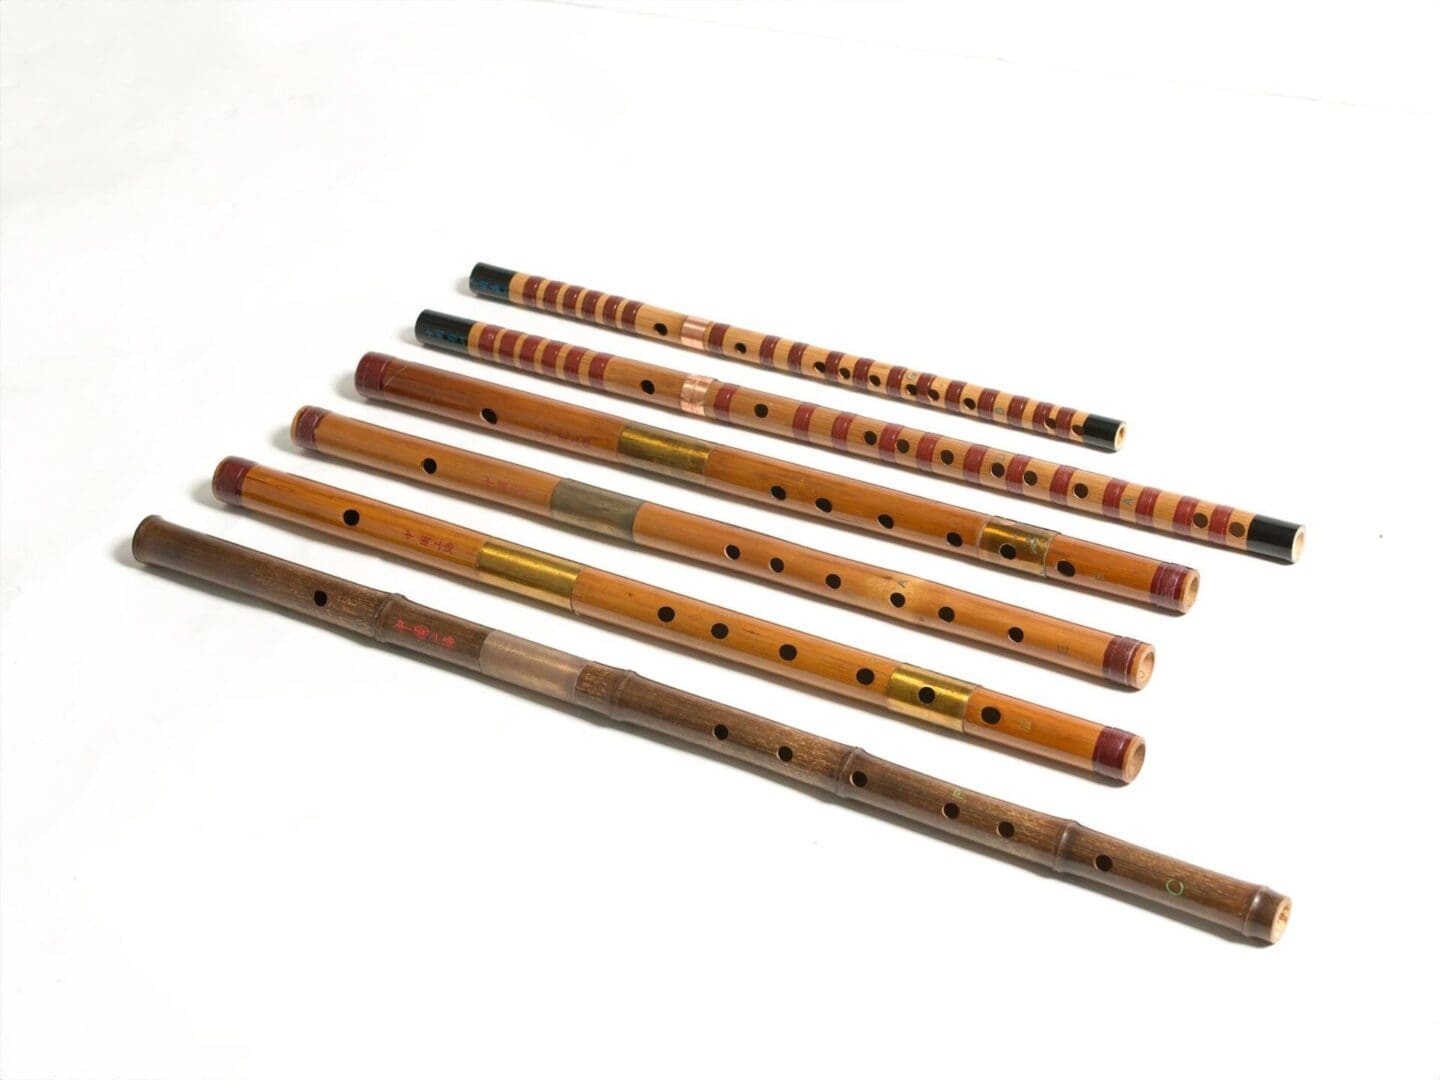 A collection of seven colorful wooden flutes (笛子) arranged diagonally on a white background.